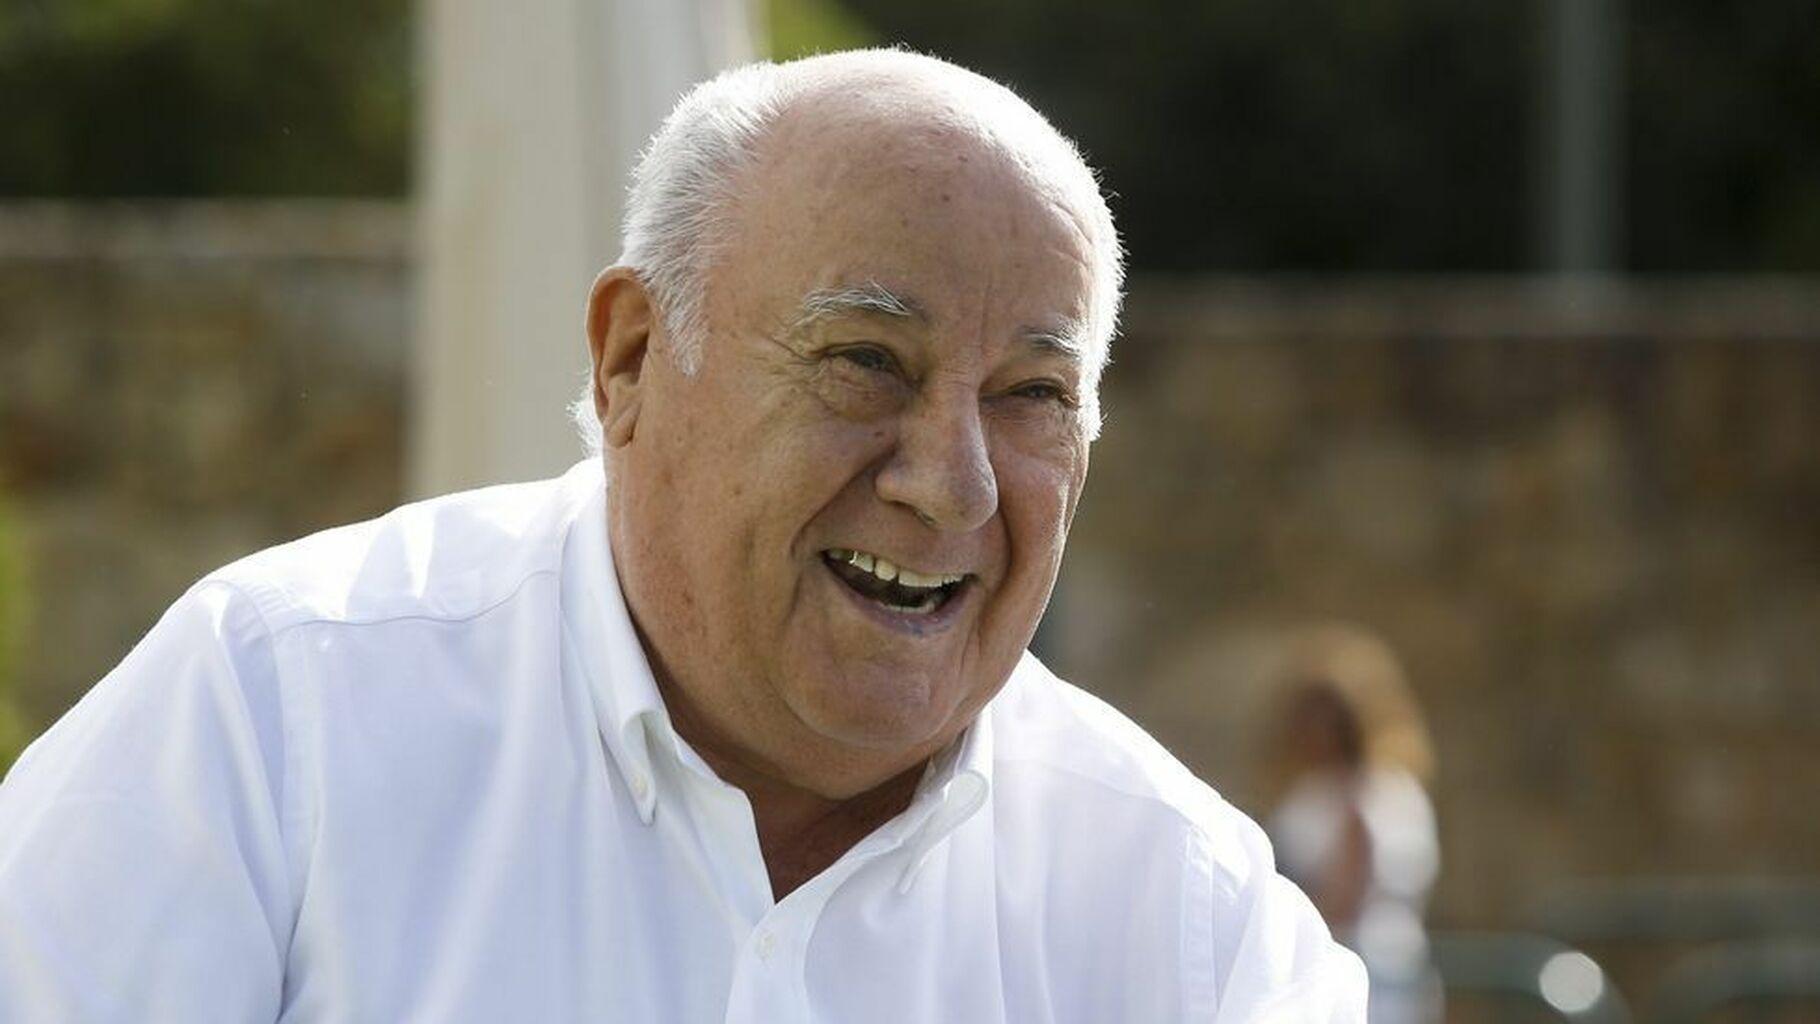 Spanish billionaire and Zara founder Amancio Ortega ranked fifth richest man in the world and second in Europe - Olive Press News Spain